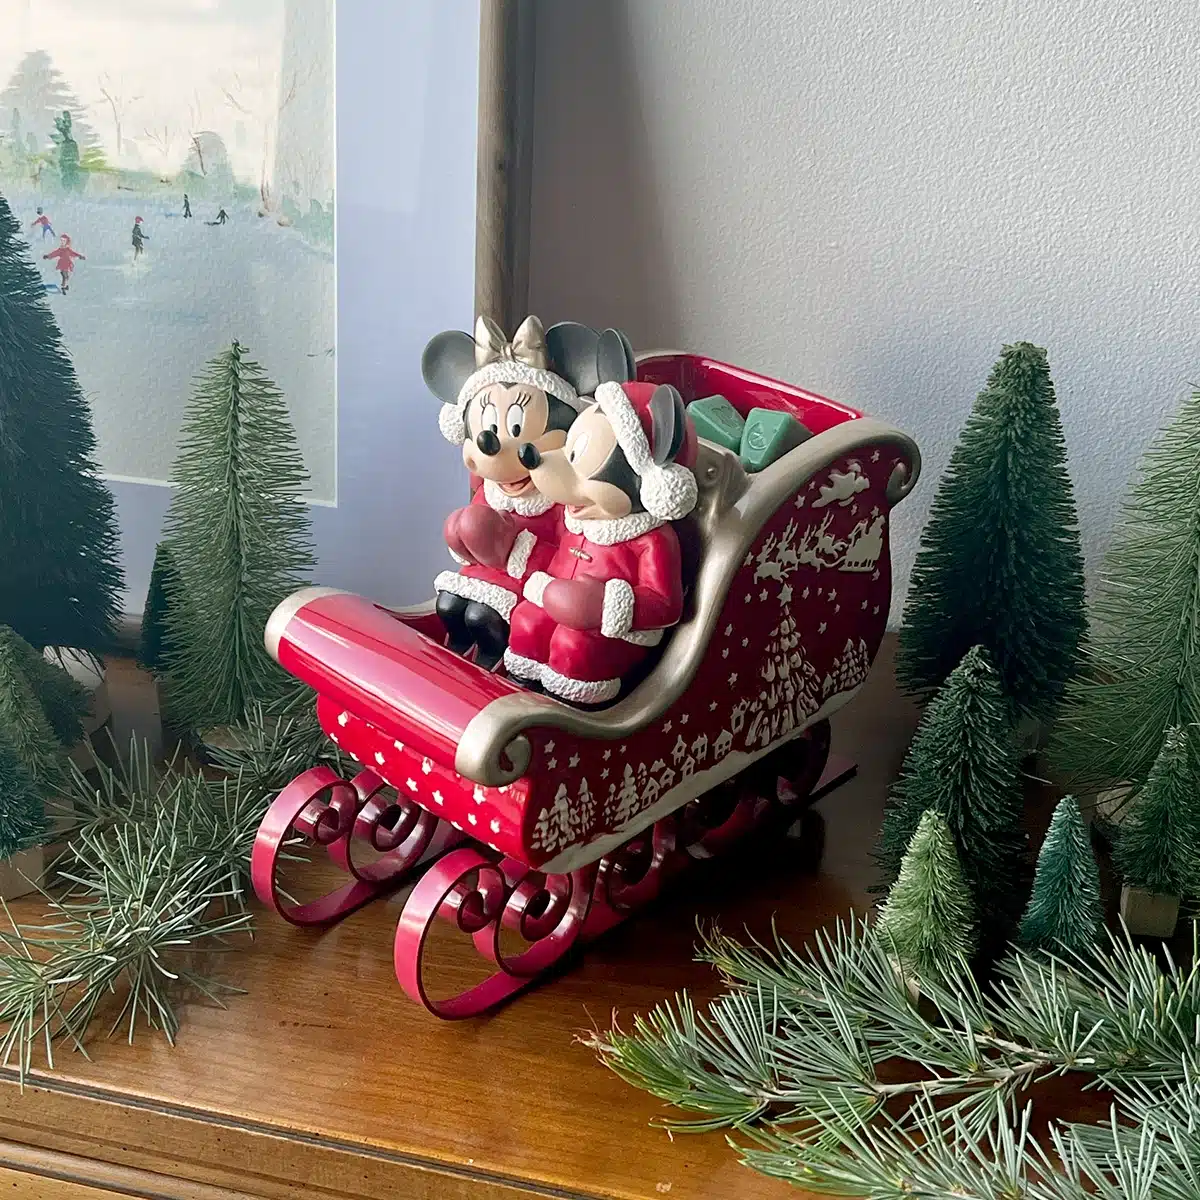 Christmas with Disney: Mickey Mouse and Minnie Mouse – Scentsy